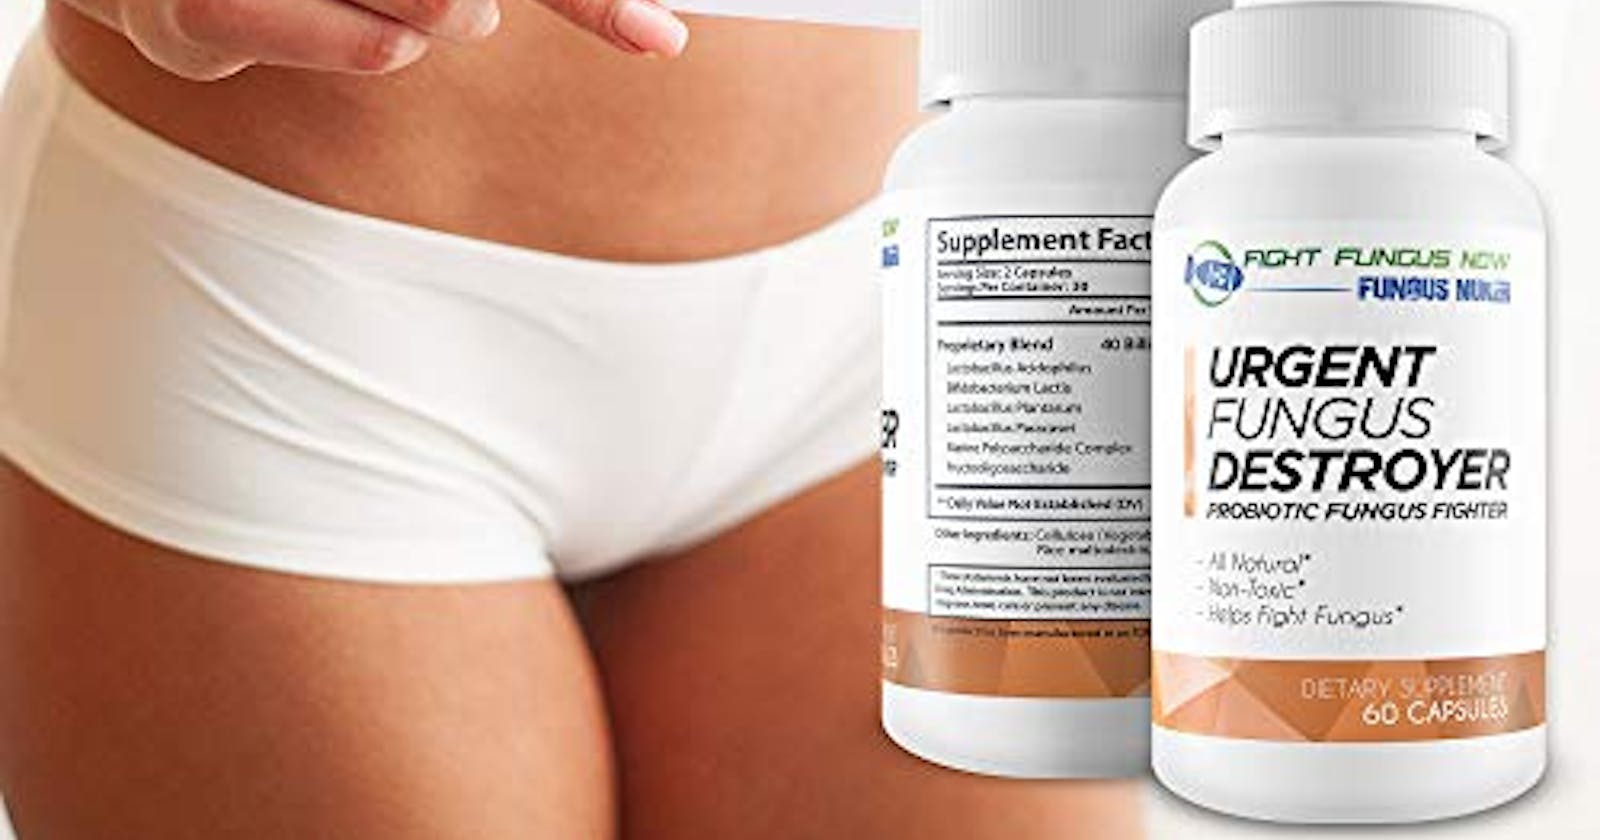 Urgent Fungus Destroyer Reviews: Weight Loss Pills That Work or Scam?